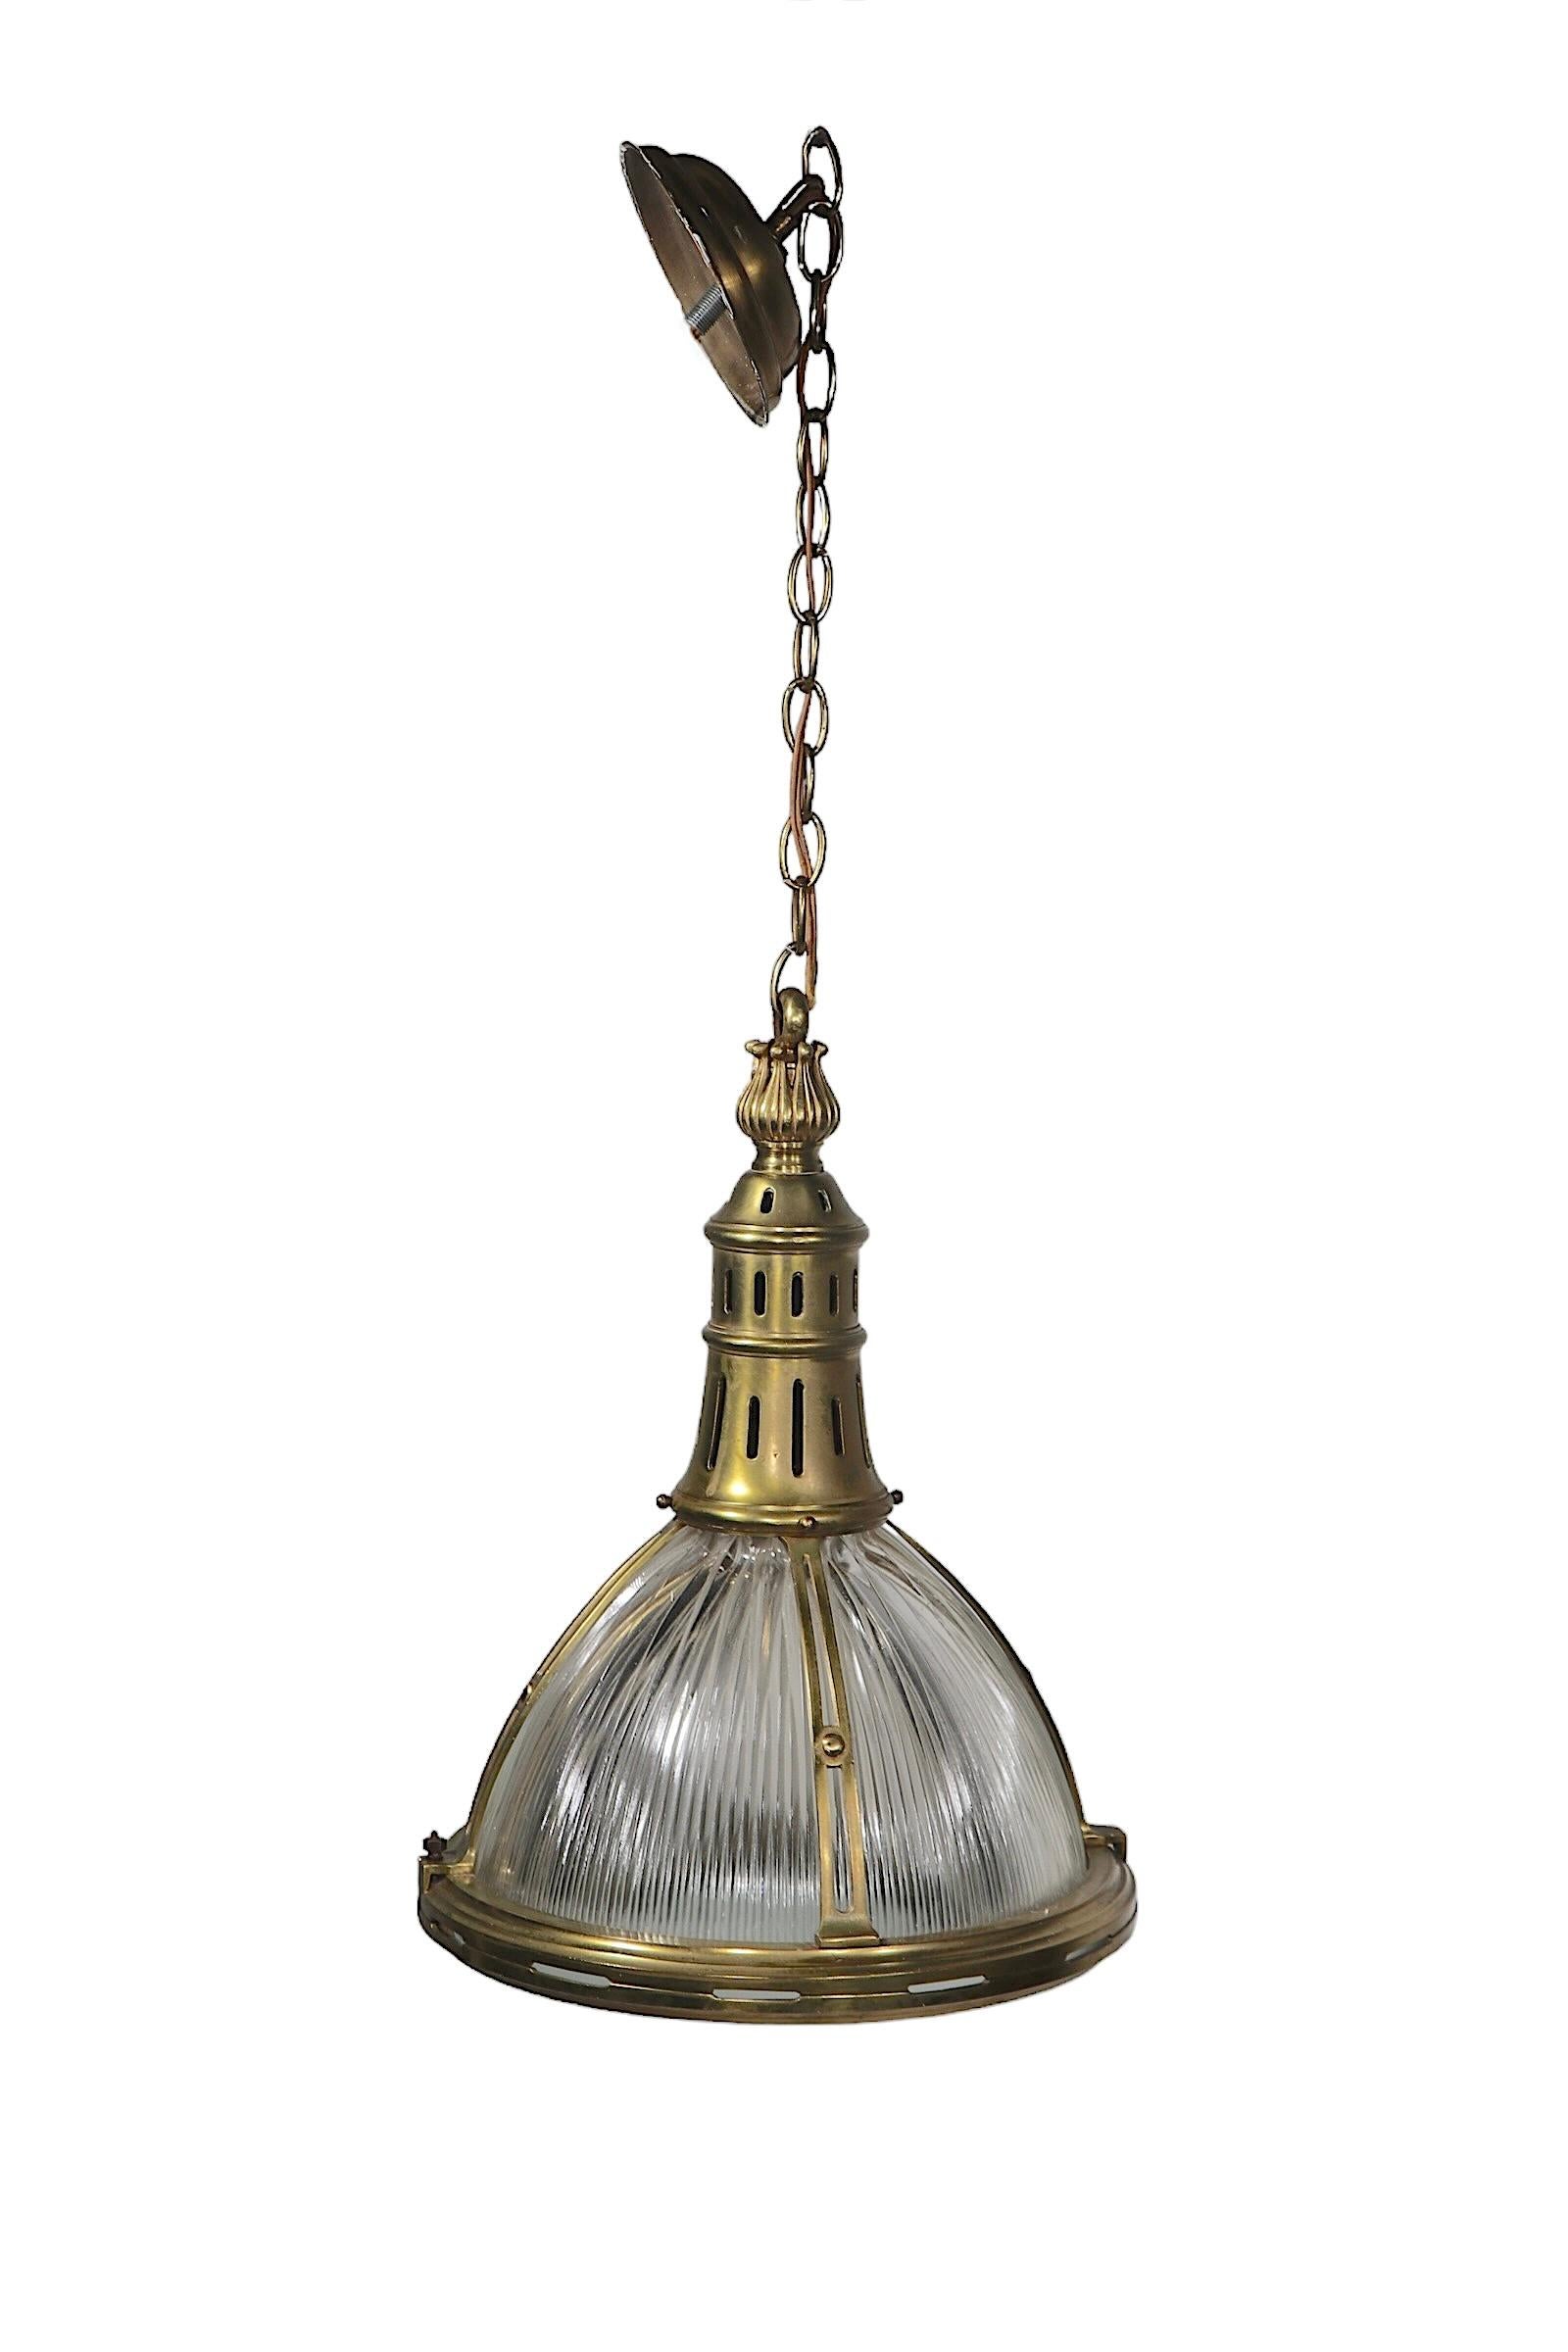 Industrial Decorative Antique Halophane Pendant Chandelier with Brass Hardware For Sale